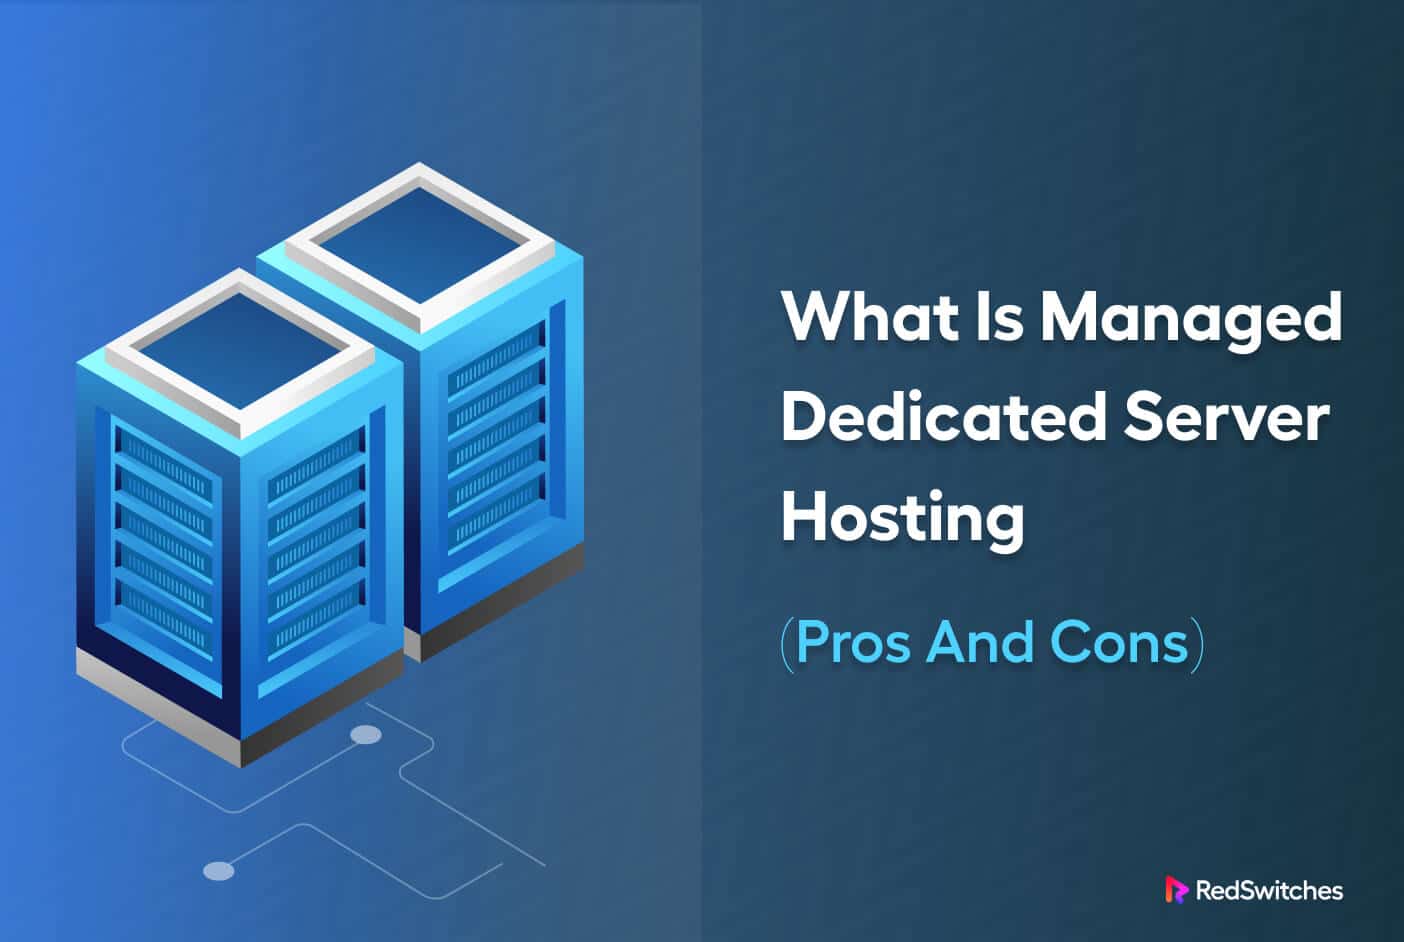 What is Managed Dedicated Server Hosting